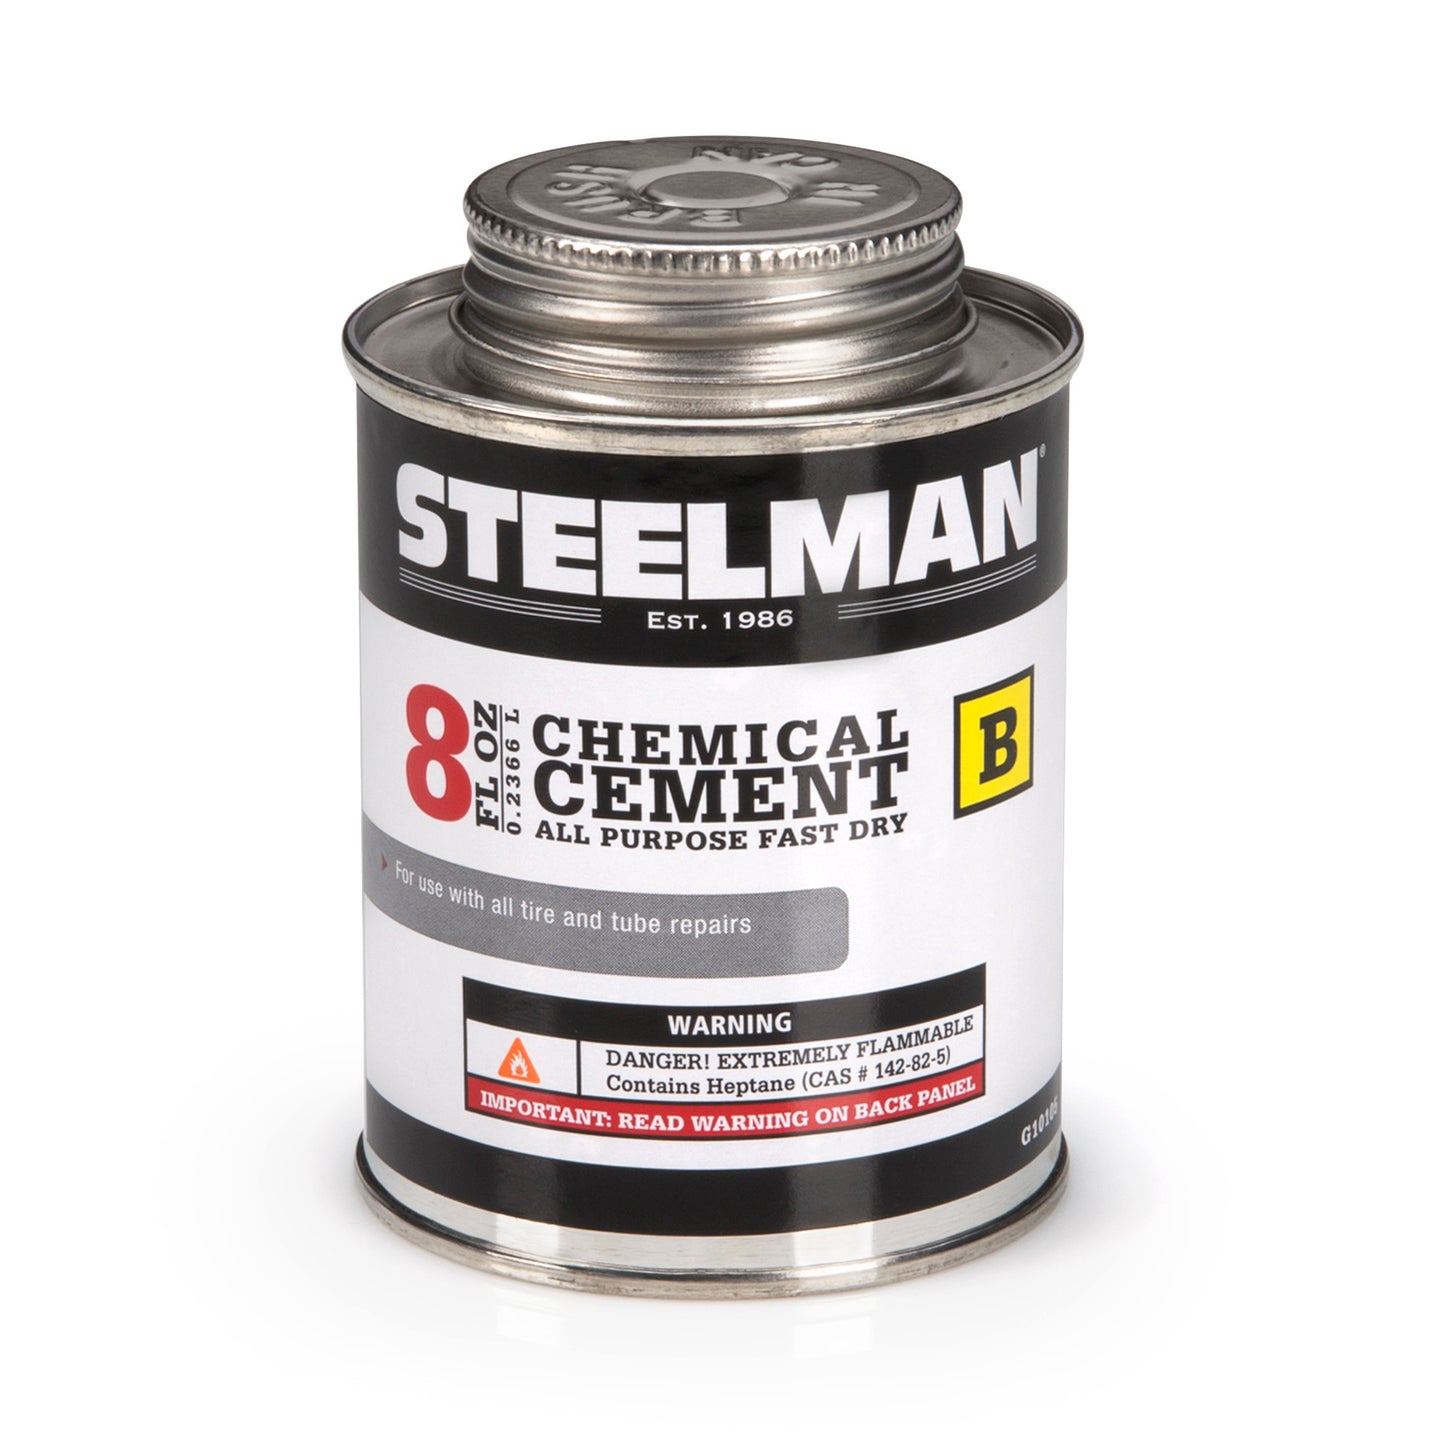 An all-purpose, fast-drying rubber cement suitable for all rubber tire and inner tube repairs. The cement contains accelerators to speed up vulcanization, with an applicator brush included under the cap